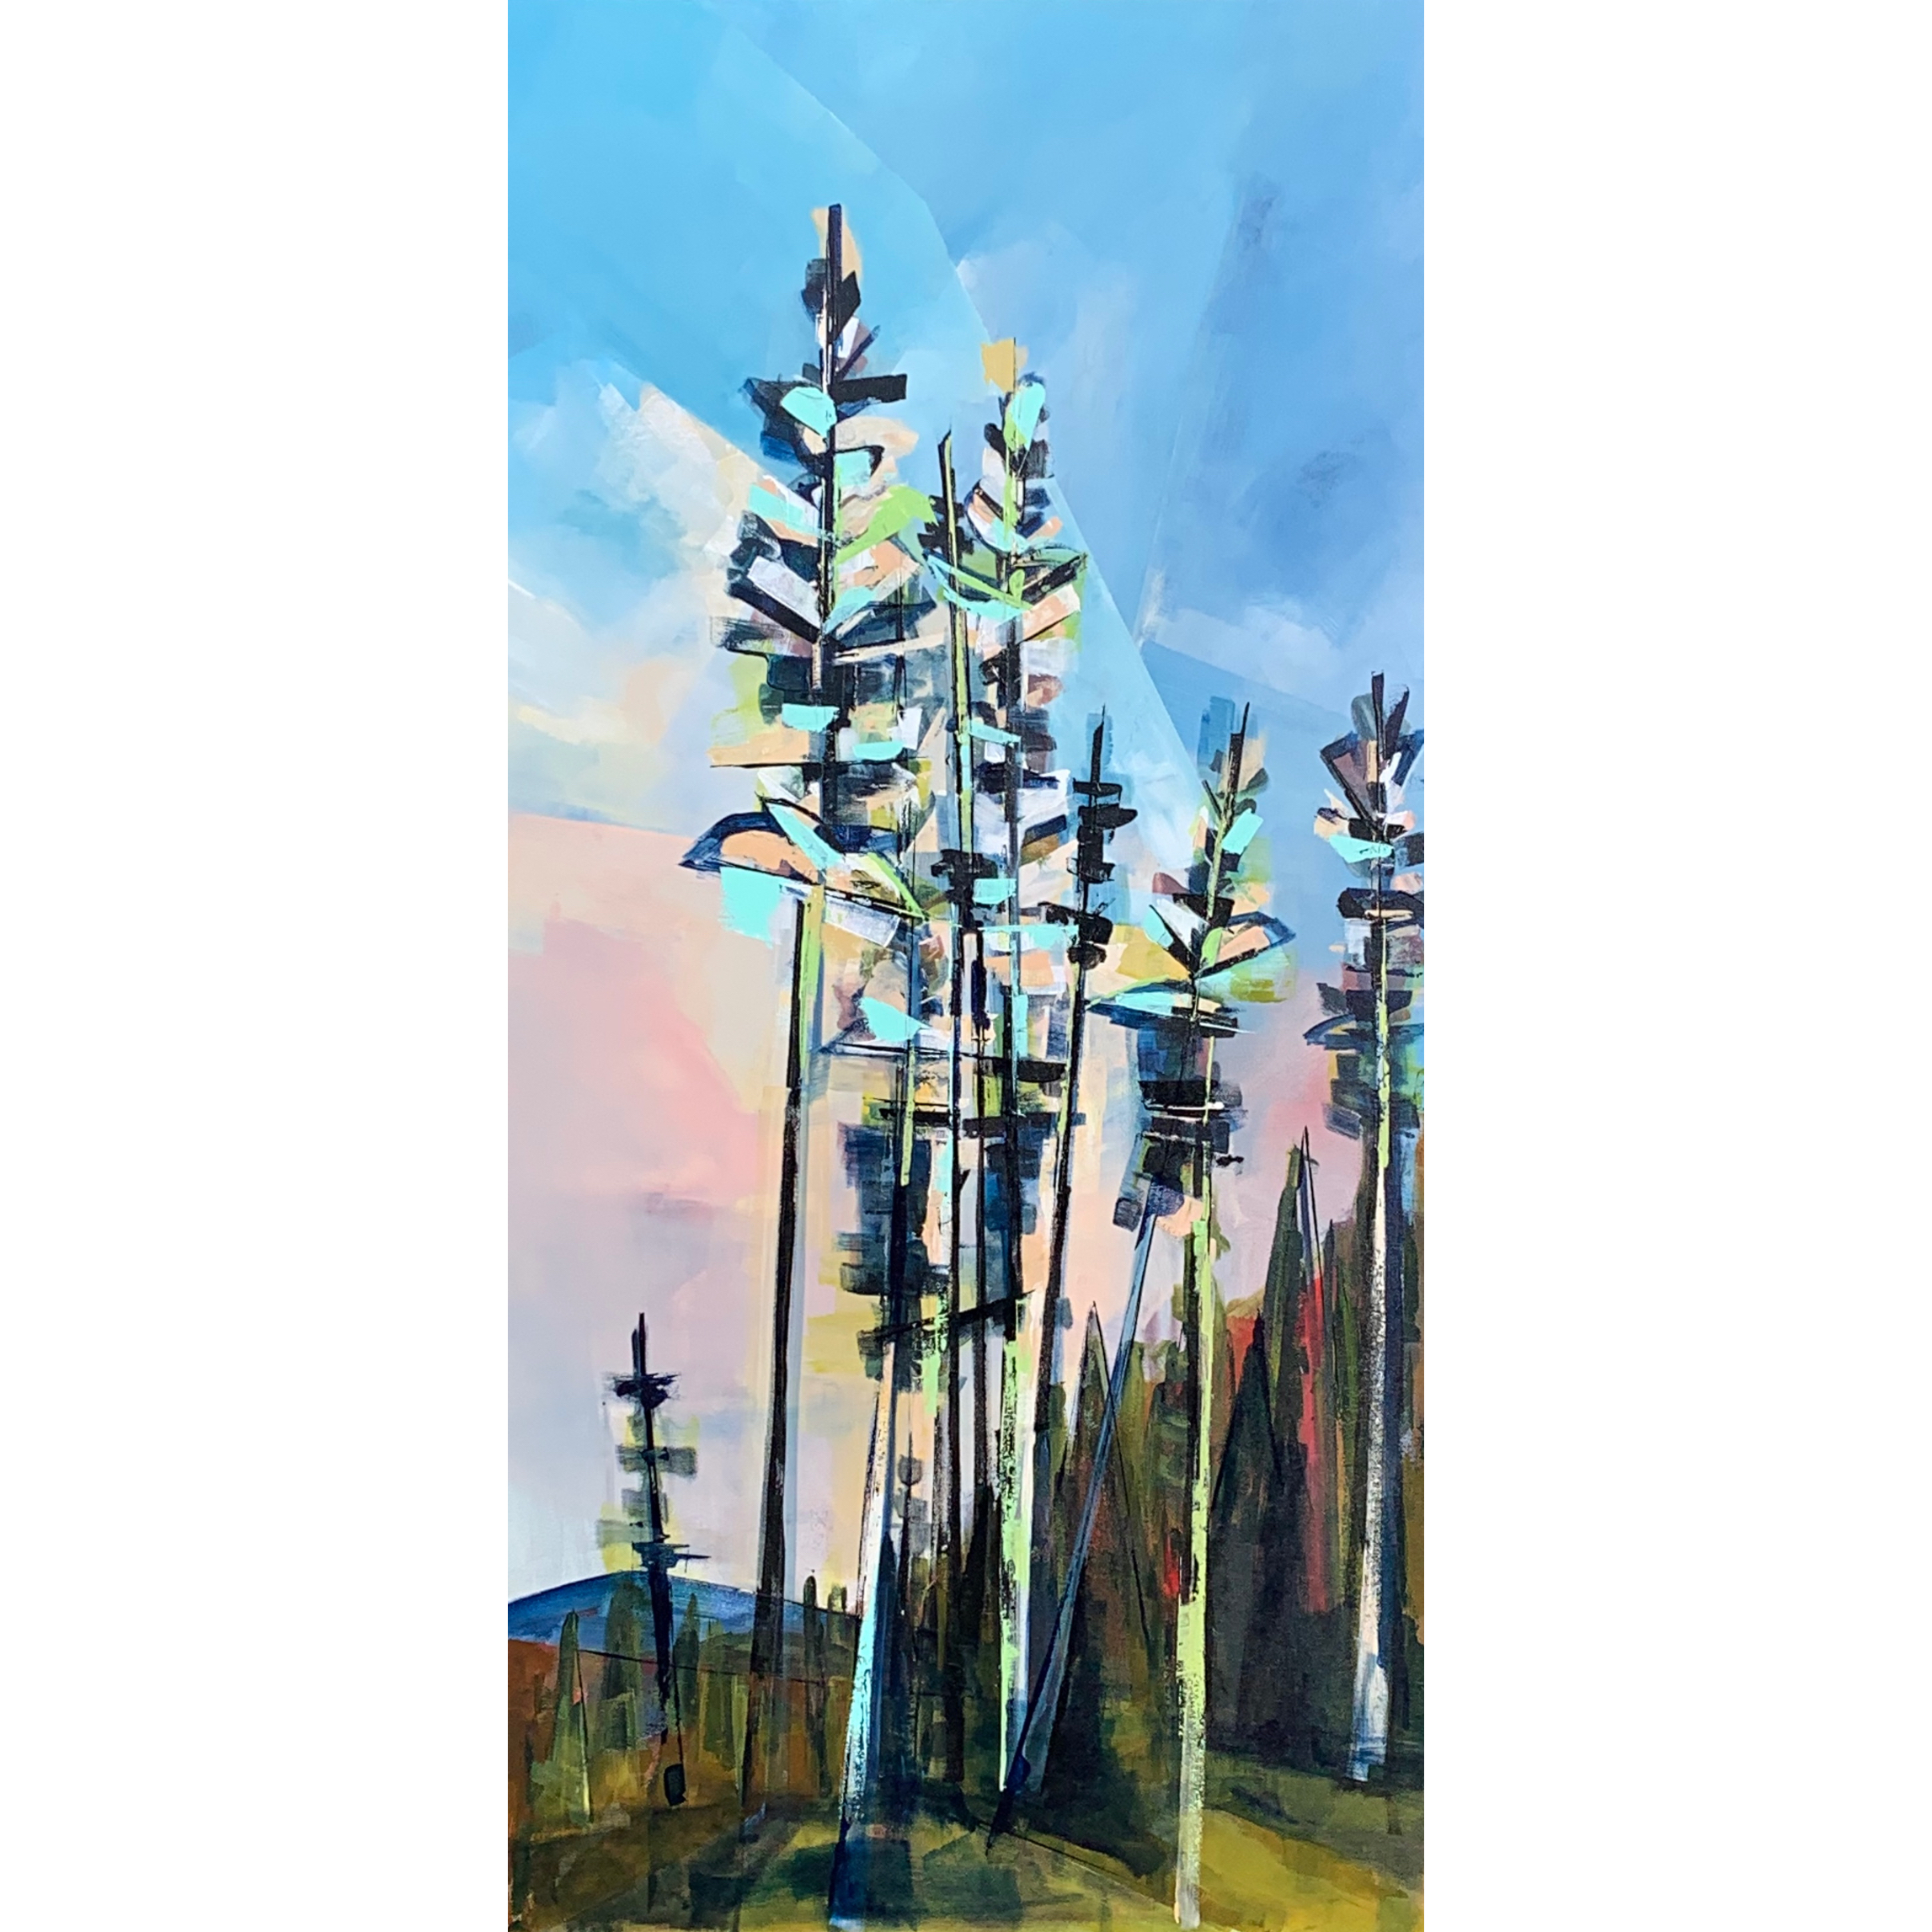 These Trees, original acrylic sunset landscape painting by Canadian artist Katie Lois at Effusion Art Gallery in Invermere, BC.